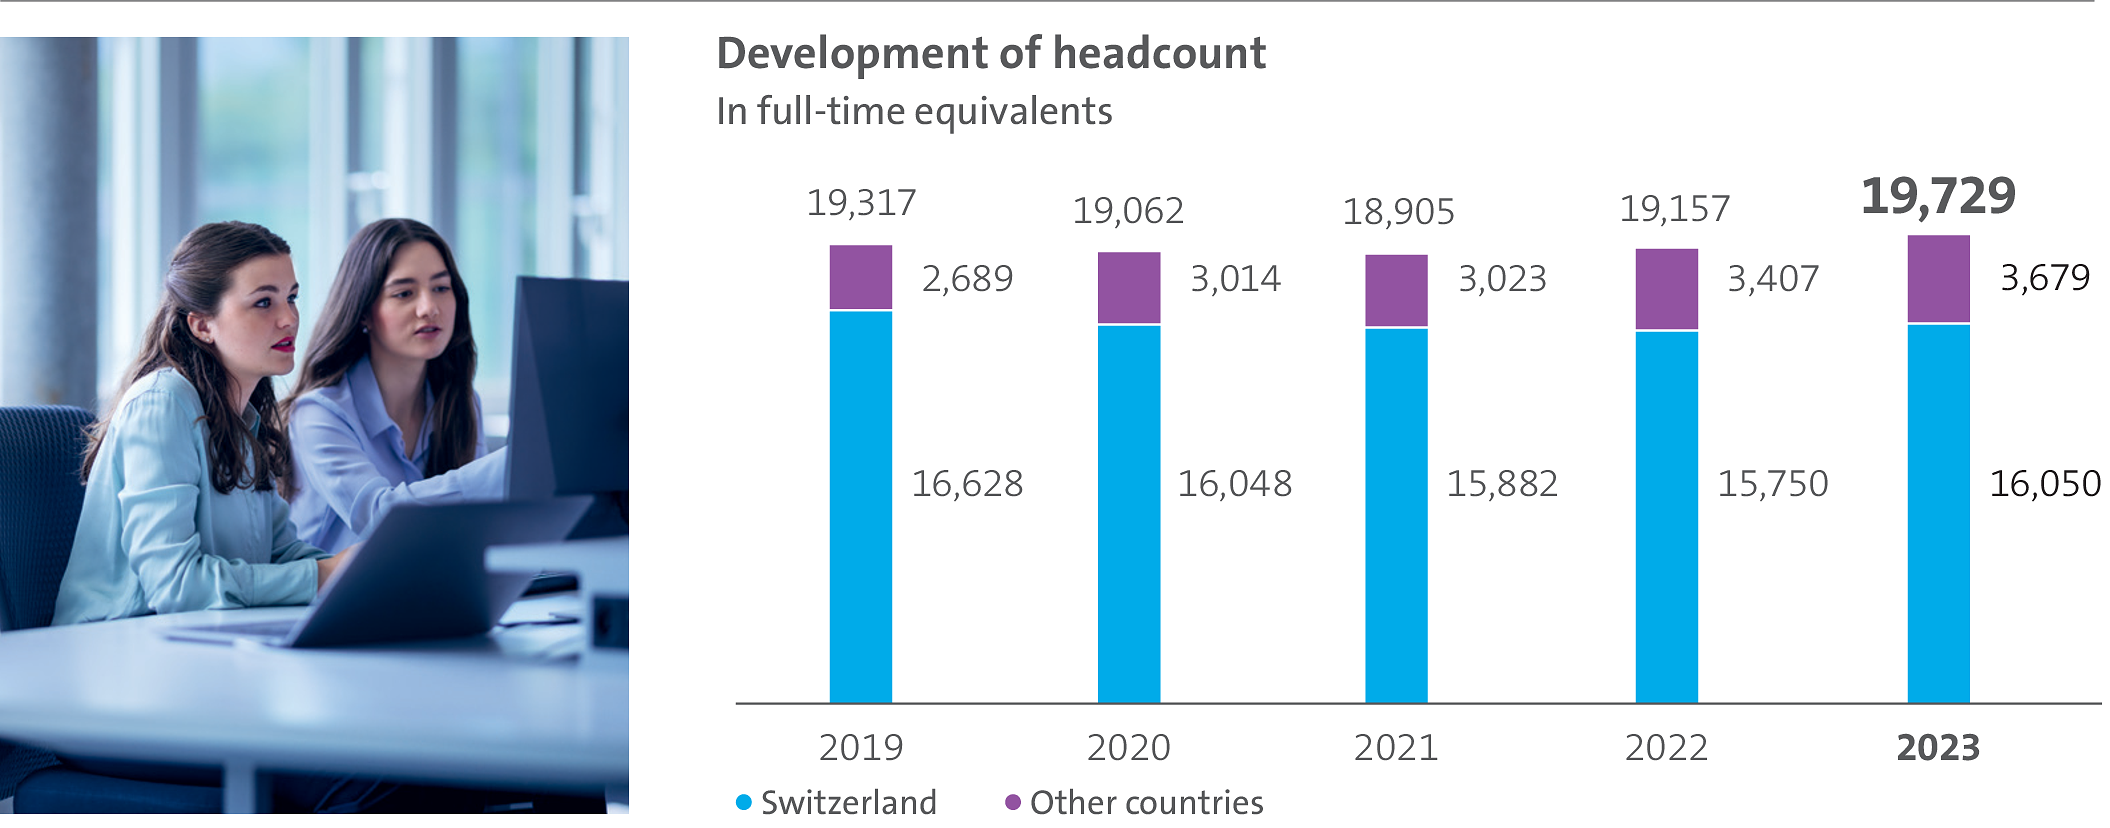 The bar chart illustrates the de­vel­op­ment of headcount in full-time equivalent employees in Switzer­land and abroad over the last five years.